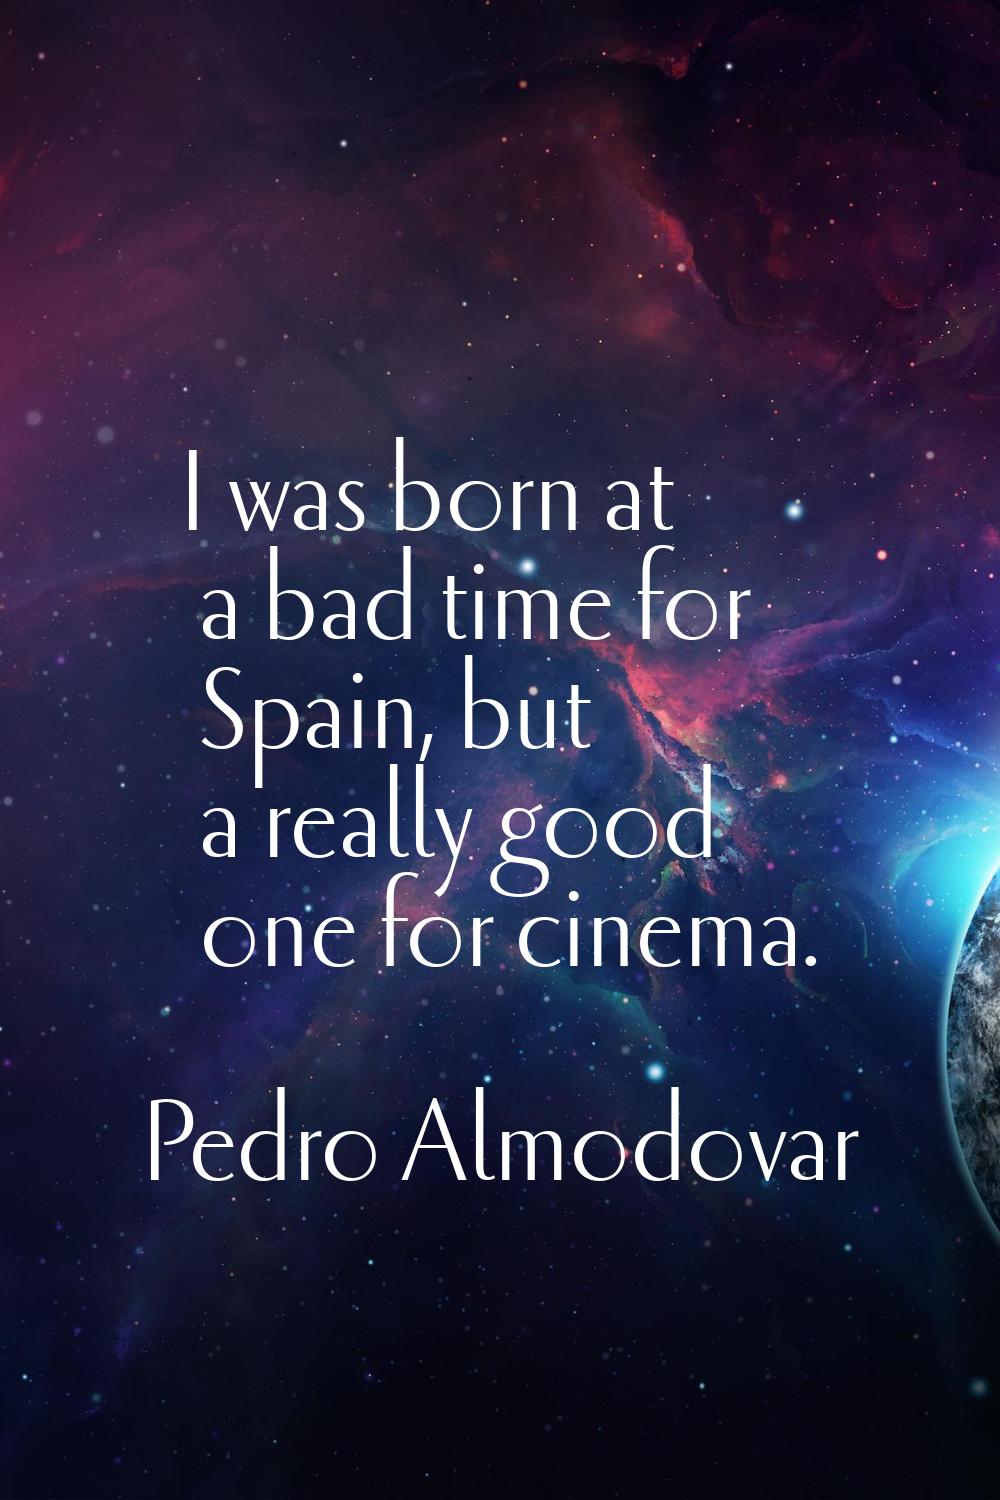 I was born at a bad time for Spain, but a really good one for cinema.